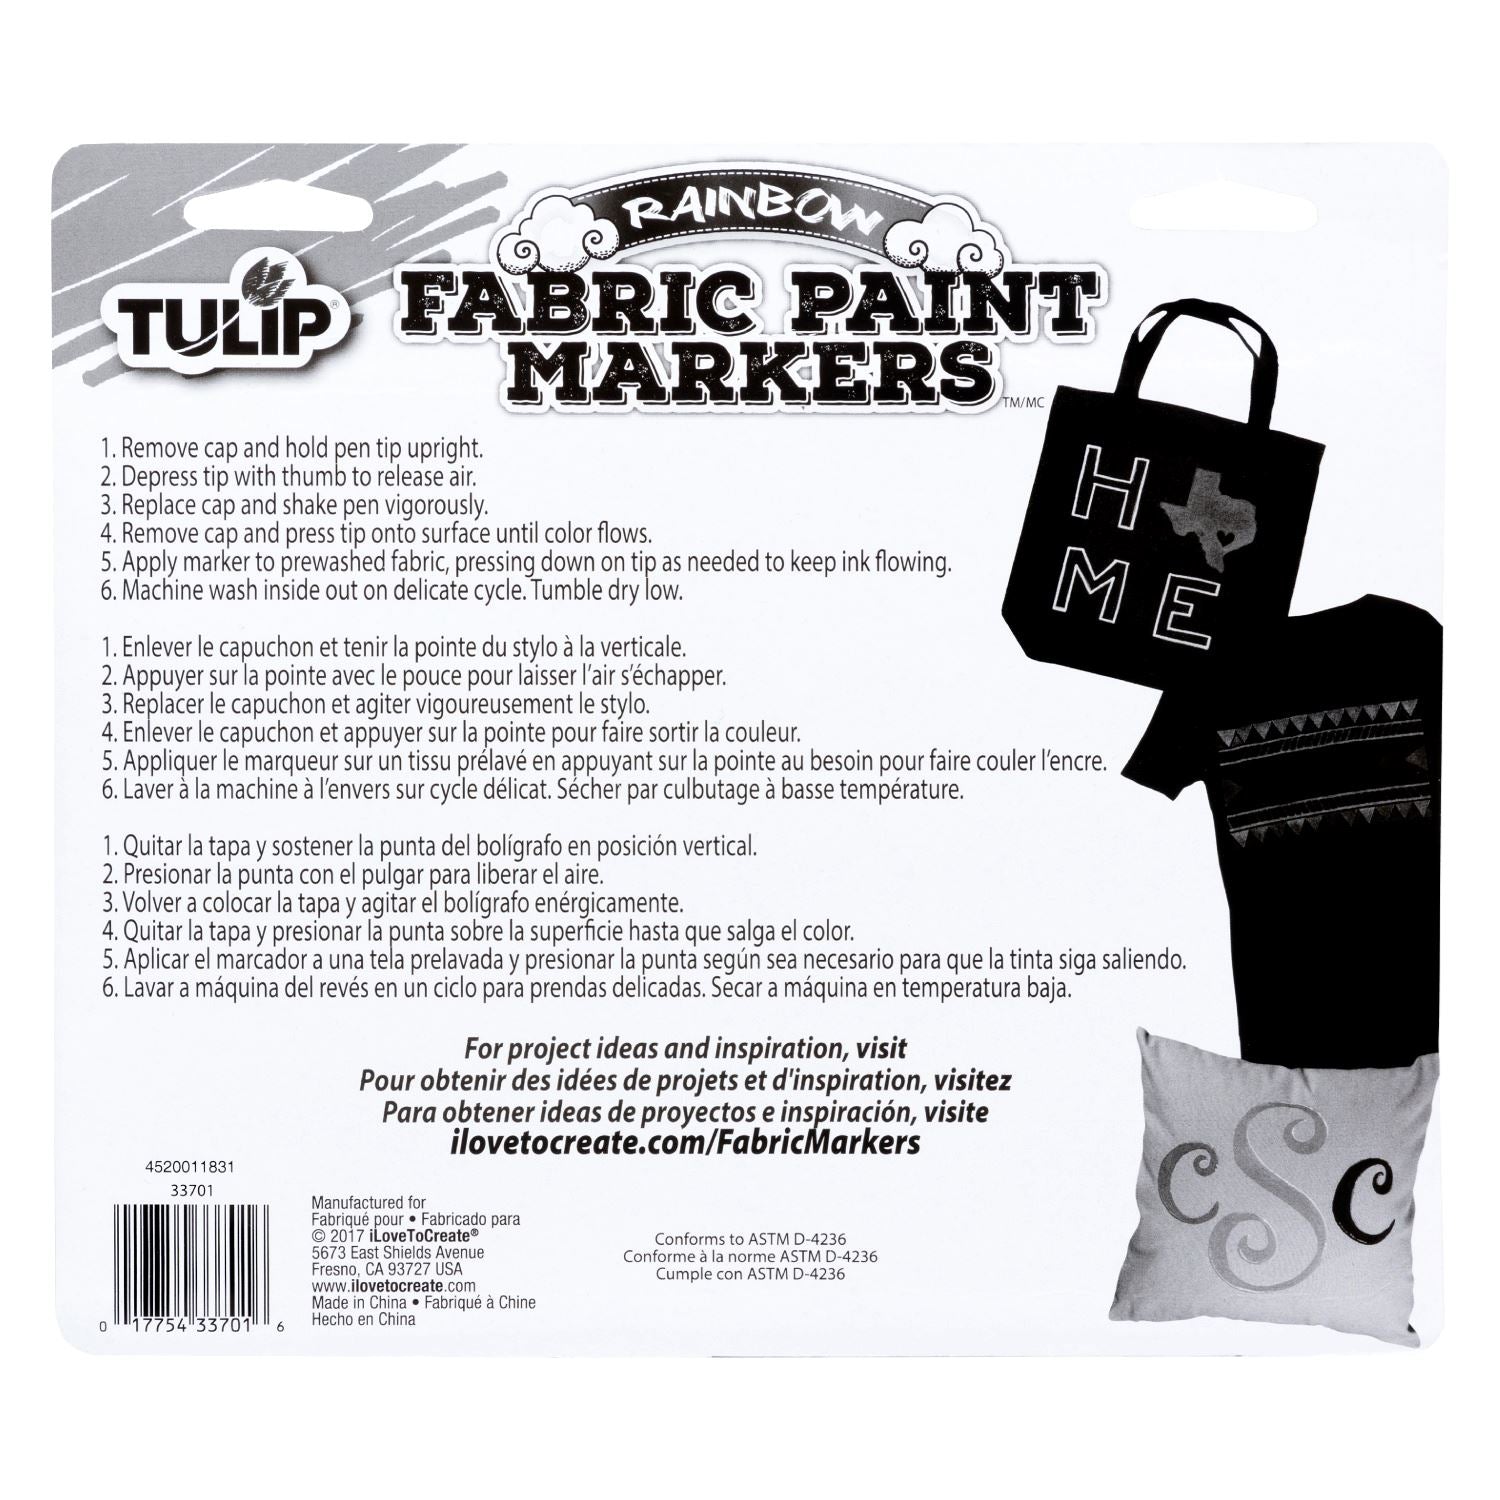 Pen Gear Dark Fabric Transfers are a type of transfer paper that allow, Sublimation